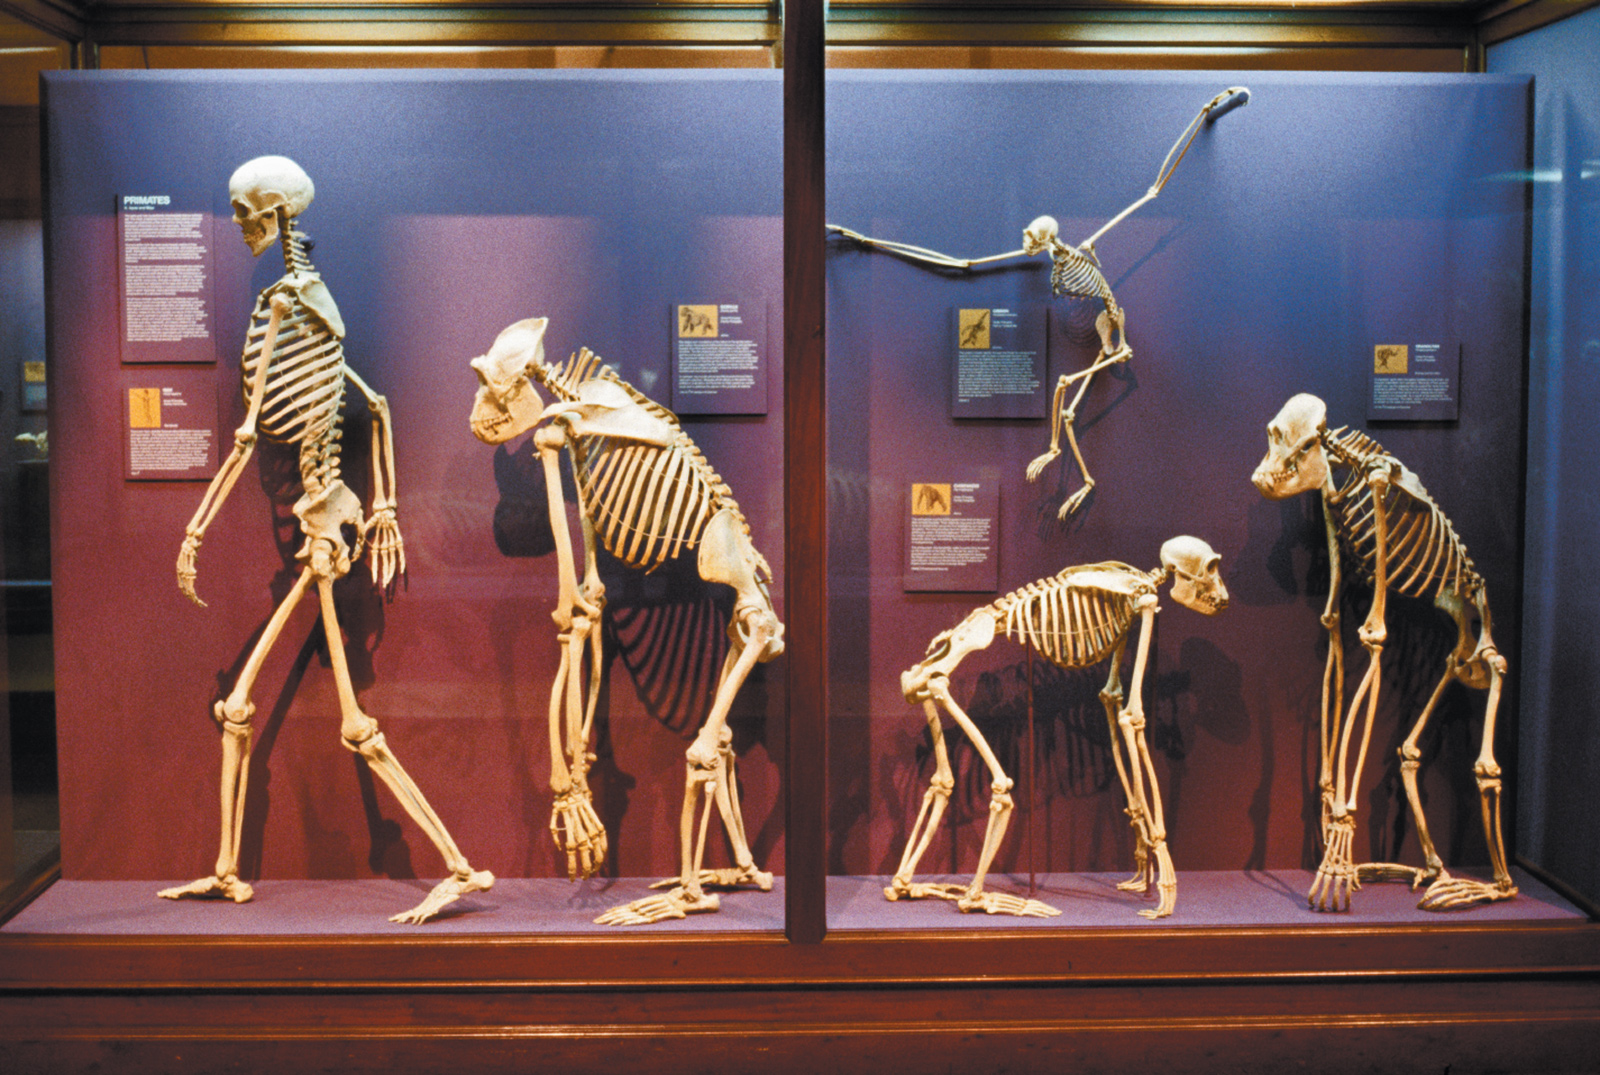 Primate skeletons at the Field Museum, Chicago, 1986